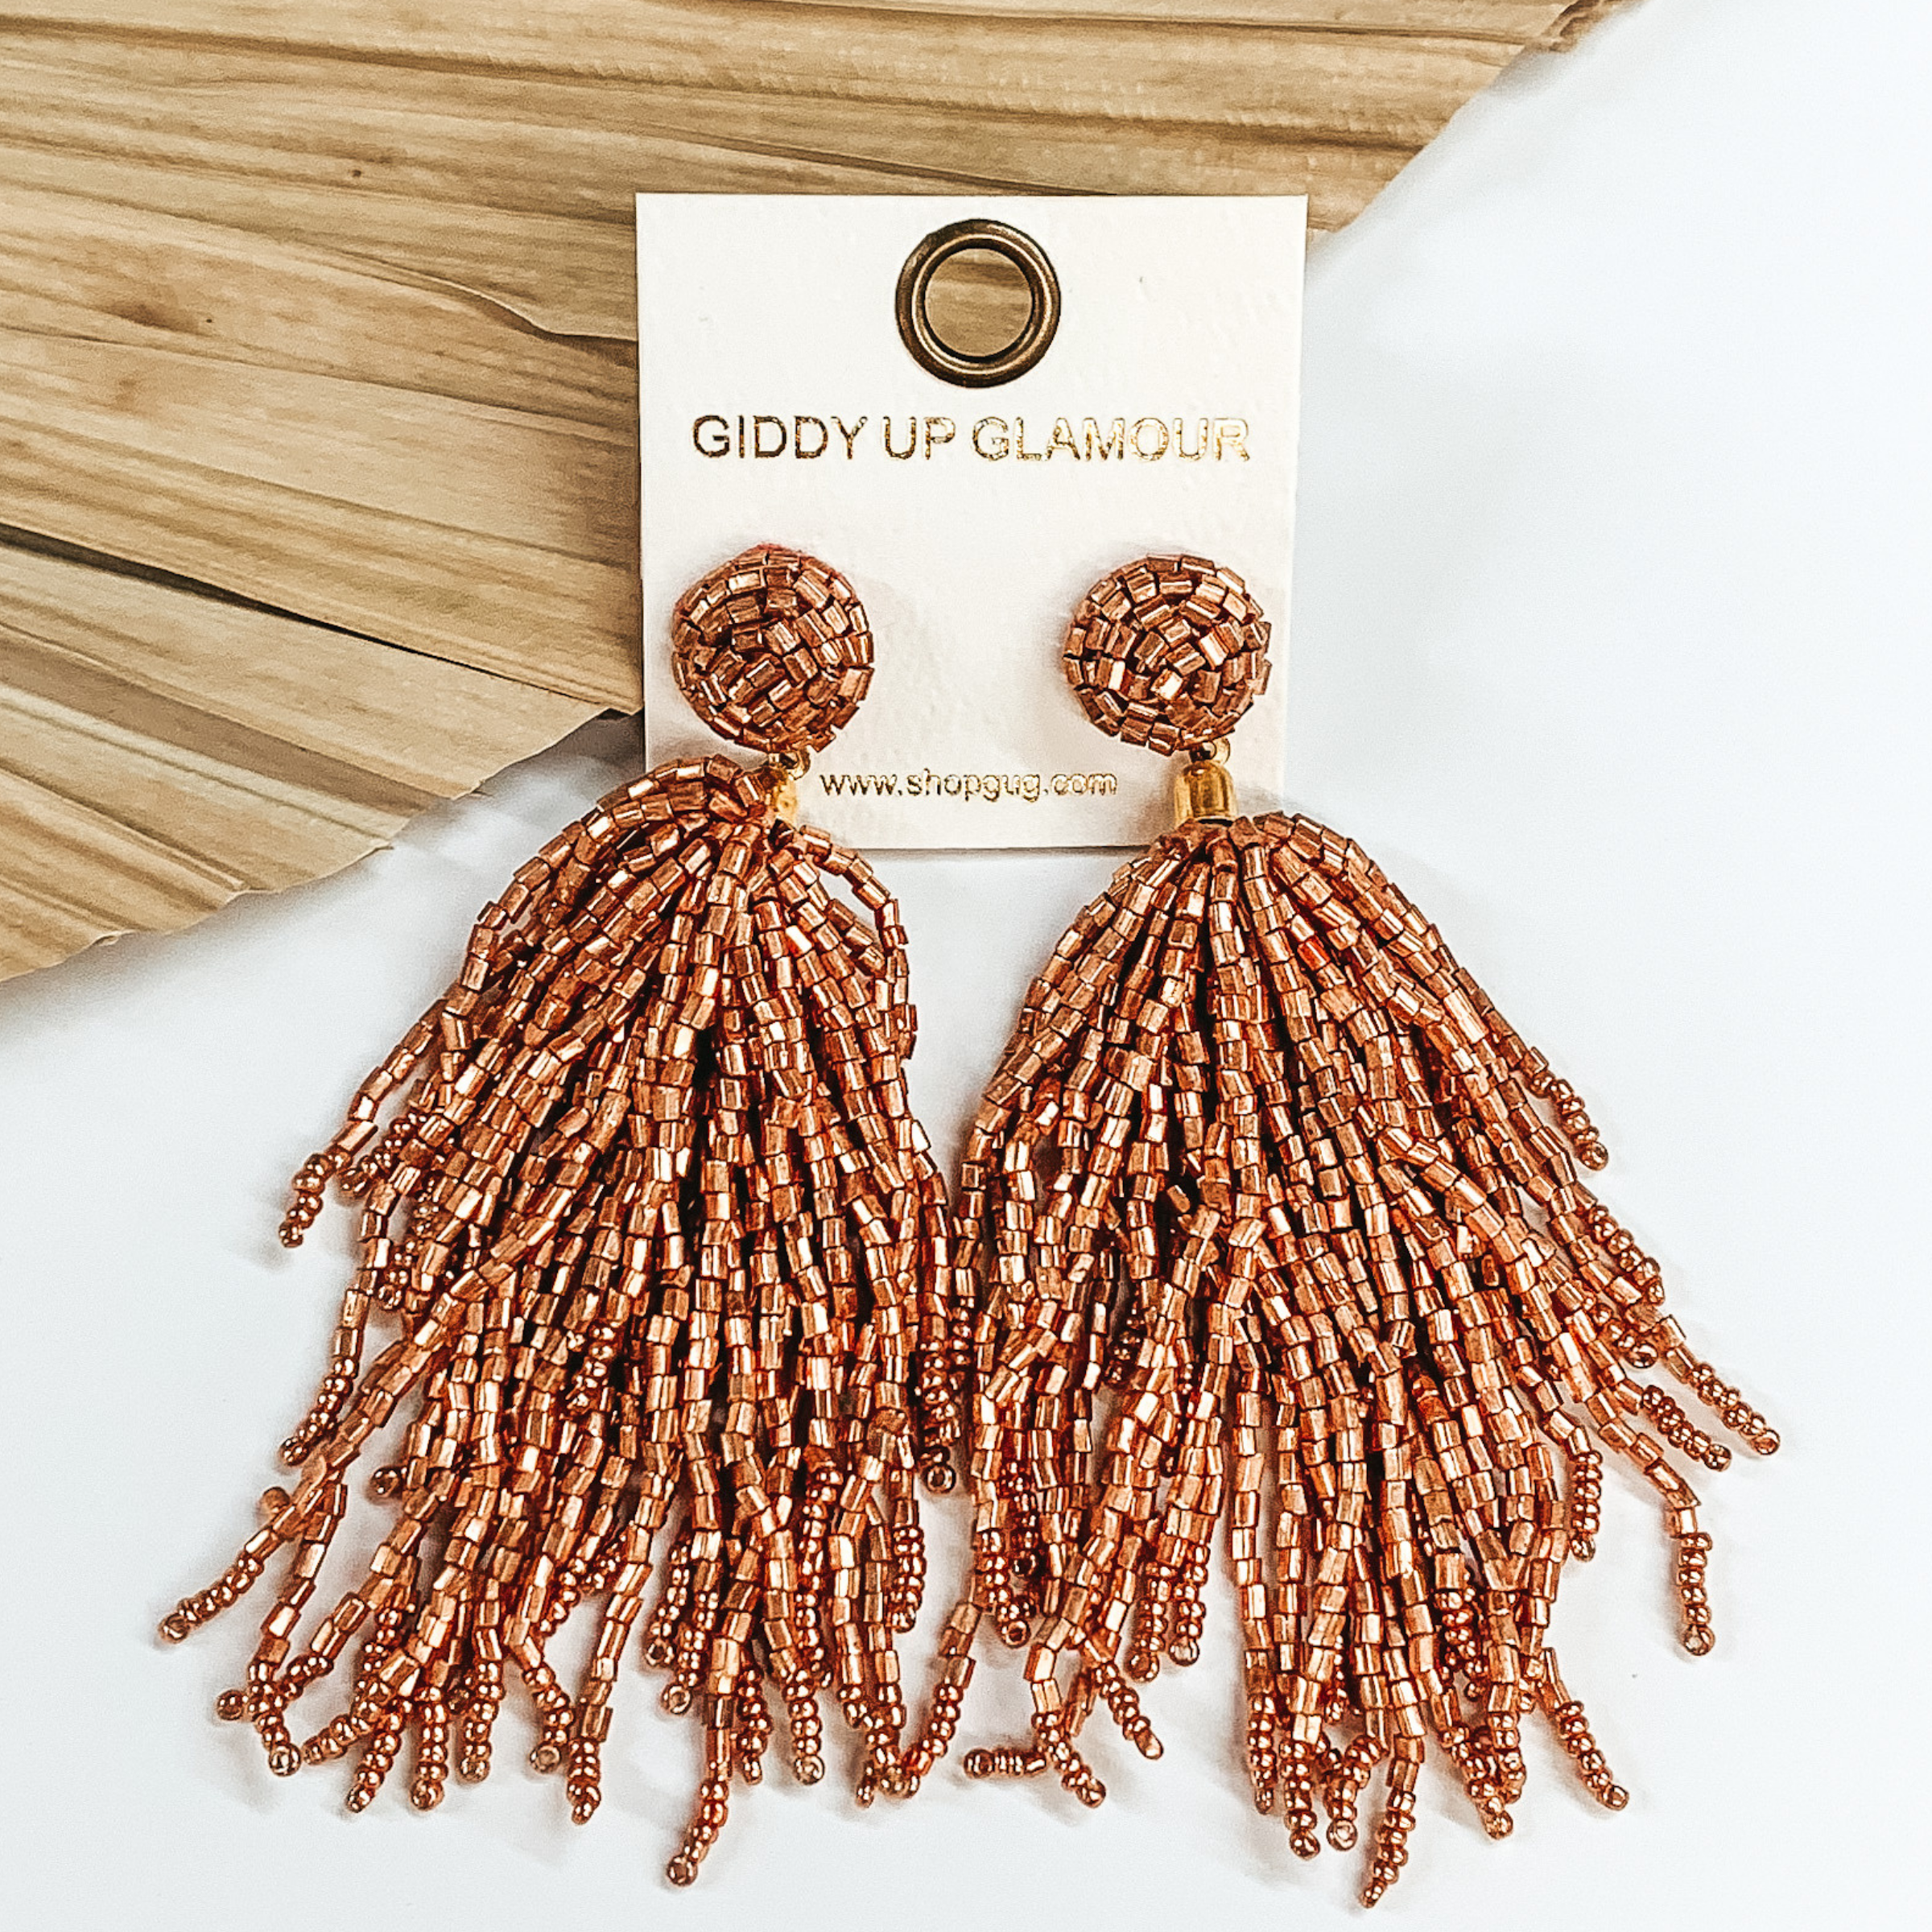 Long beaded stud earrings with a beaded  tassel in rose gold. These earrings are pictured  on a white background with a dried palm leaf  in the background.